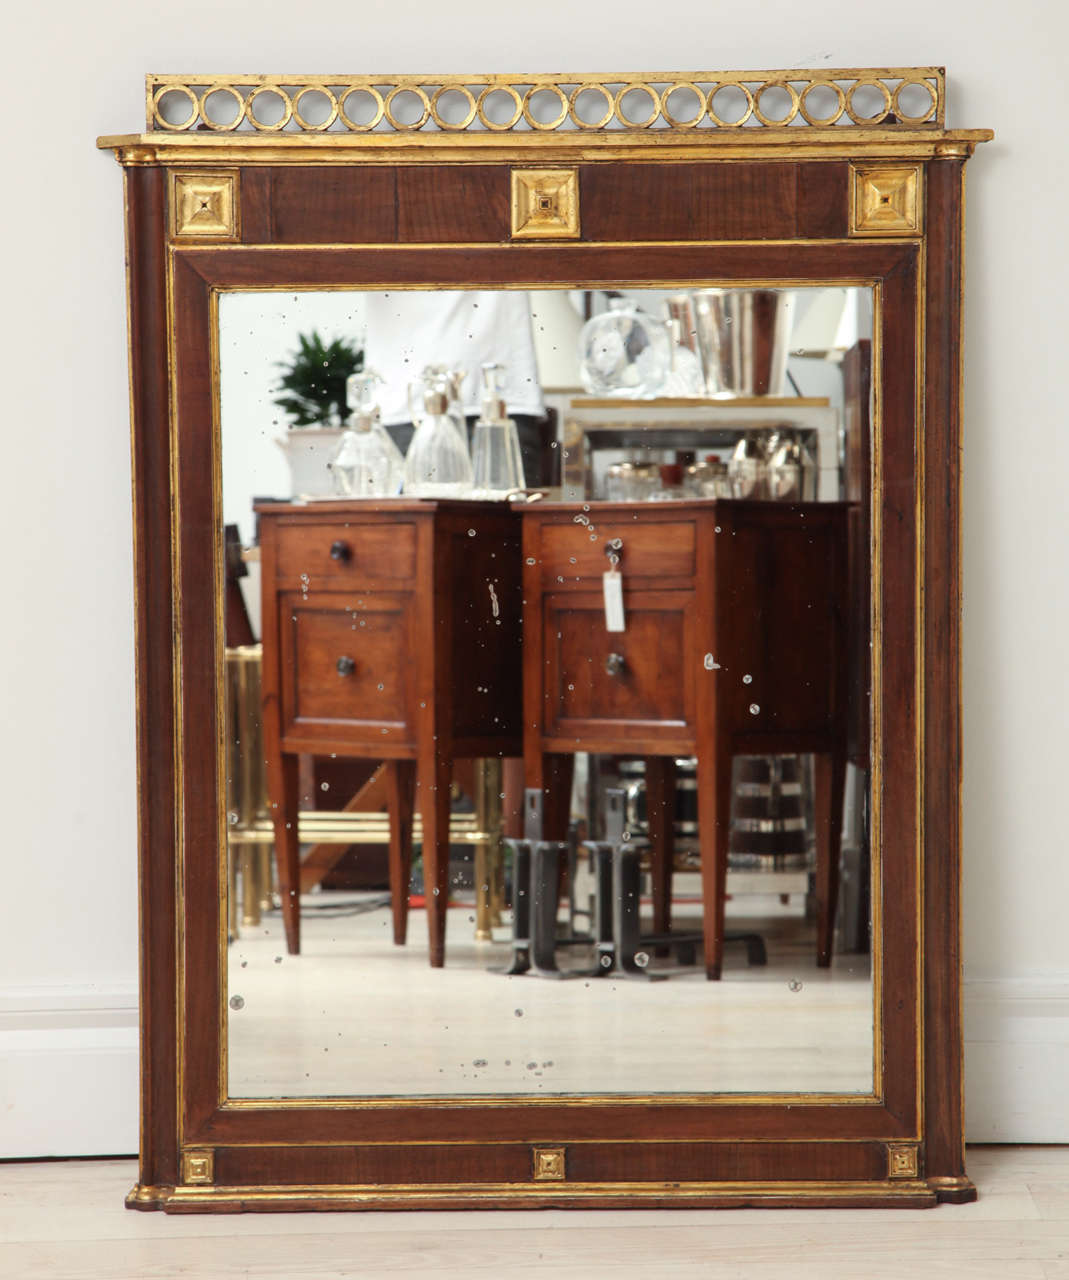 Mahogany and gilt wood mirror with square corner detail, decorative open work ring crown, and original mirror plate